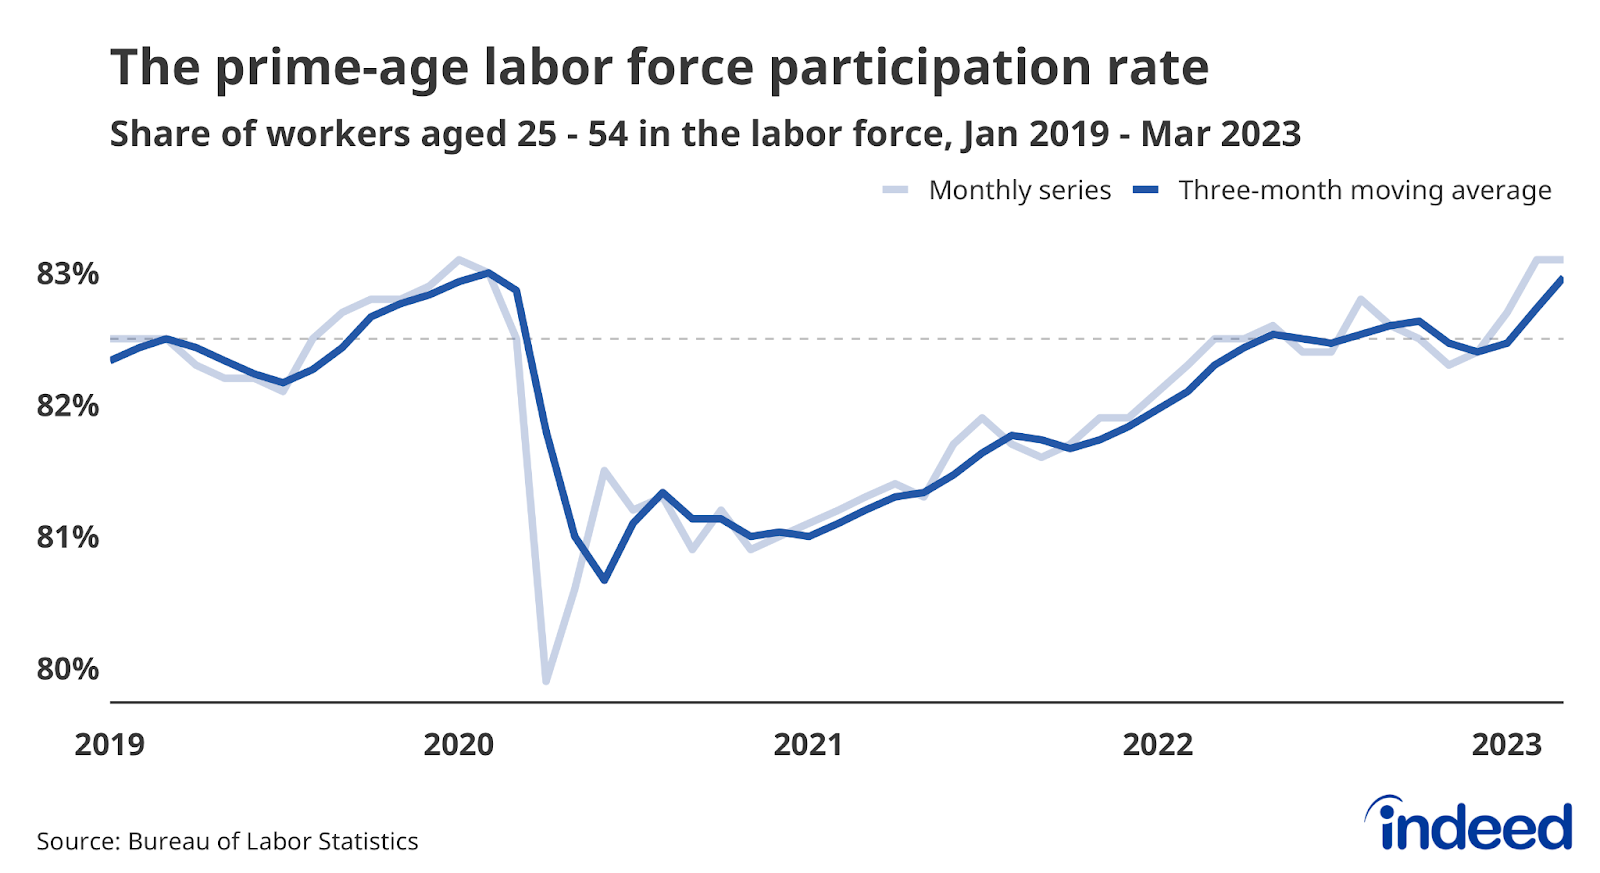 A line graph titled “The prime-age labor force participation rate” covering January 2019 to March 2023. The vertical axis goes from 80% to 83%. The participation rate for workers ages 25 to 54 dropped in spring 2020 and then rose through 2021 and 2022 before returning to pre-pandemic levels early in 2023.